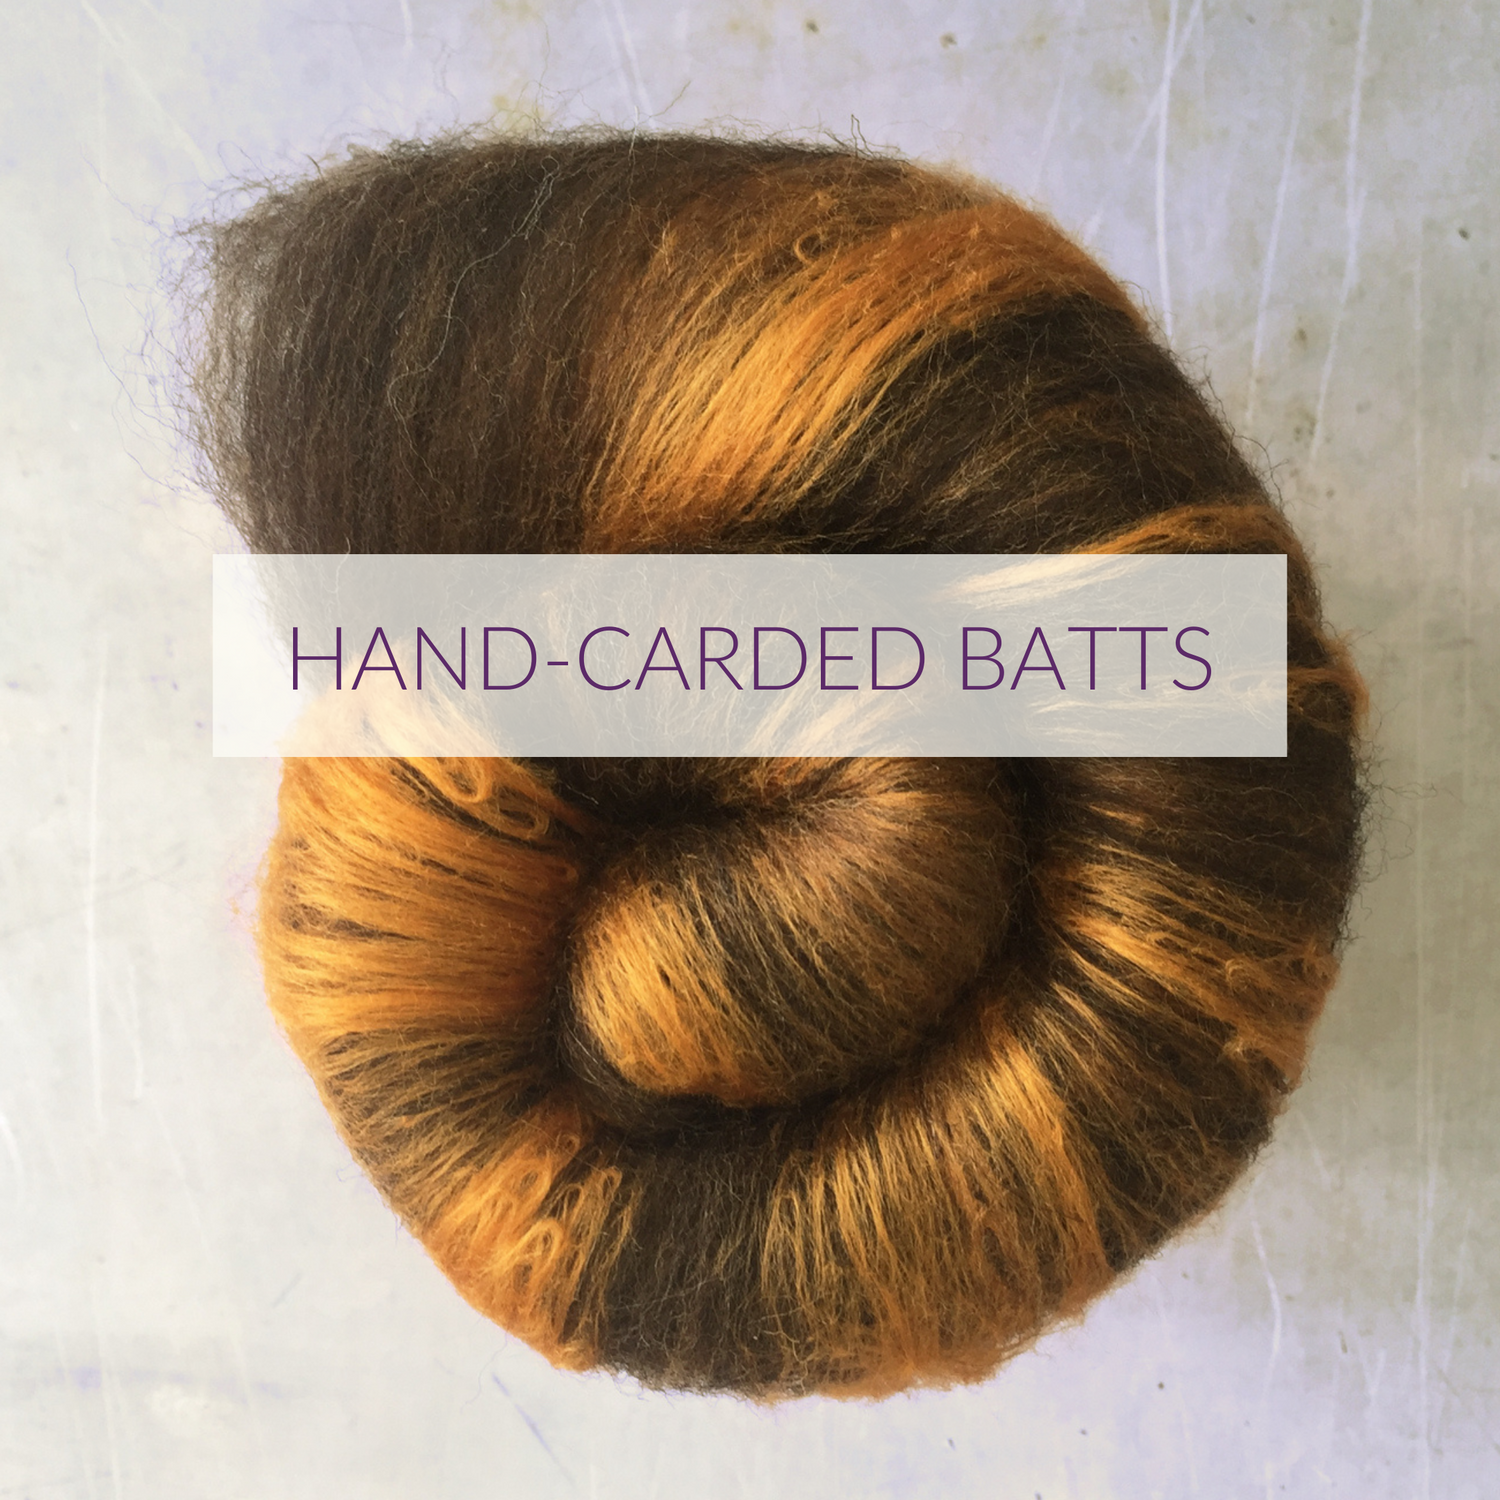 Hand-carded Batts